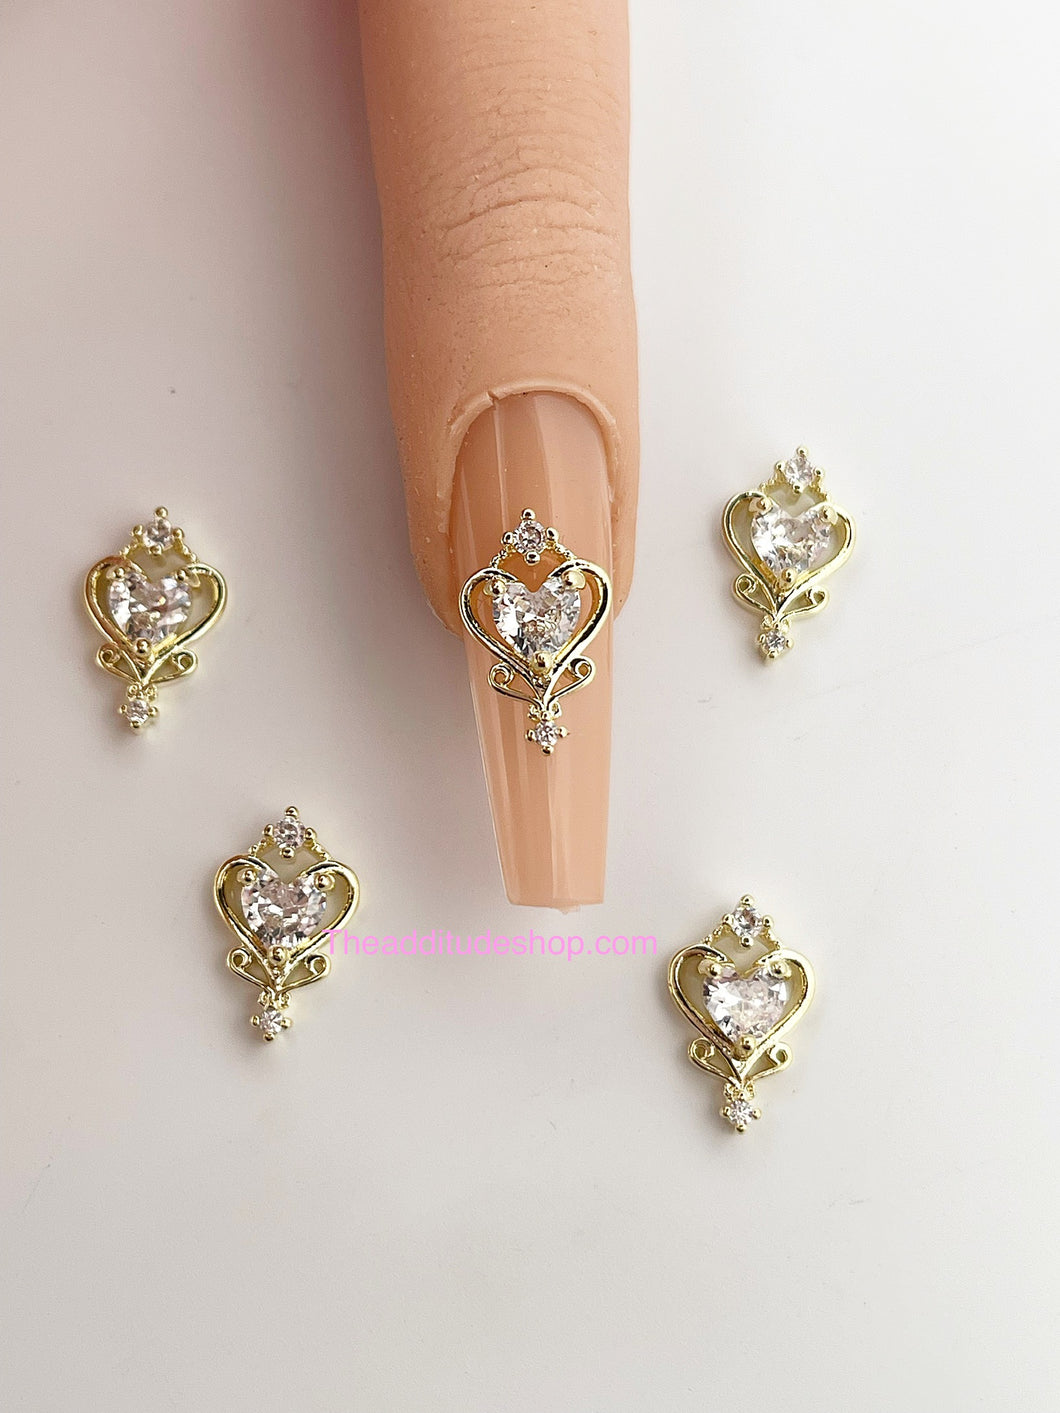 New Vintage Zircon Heart Nail Charms-5 Pieces